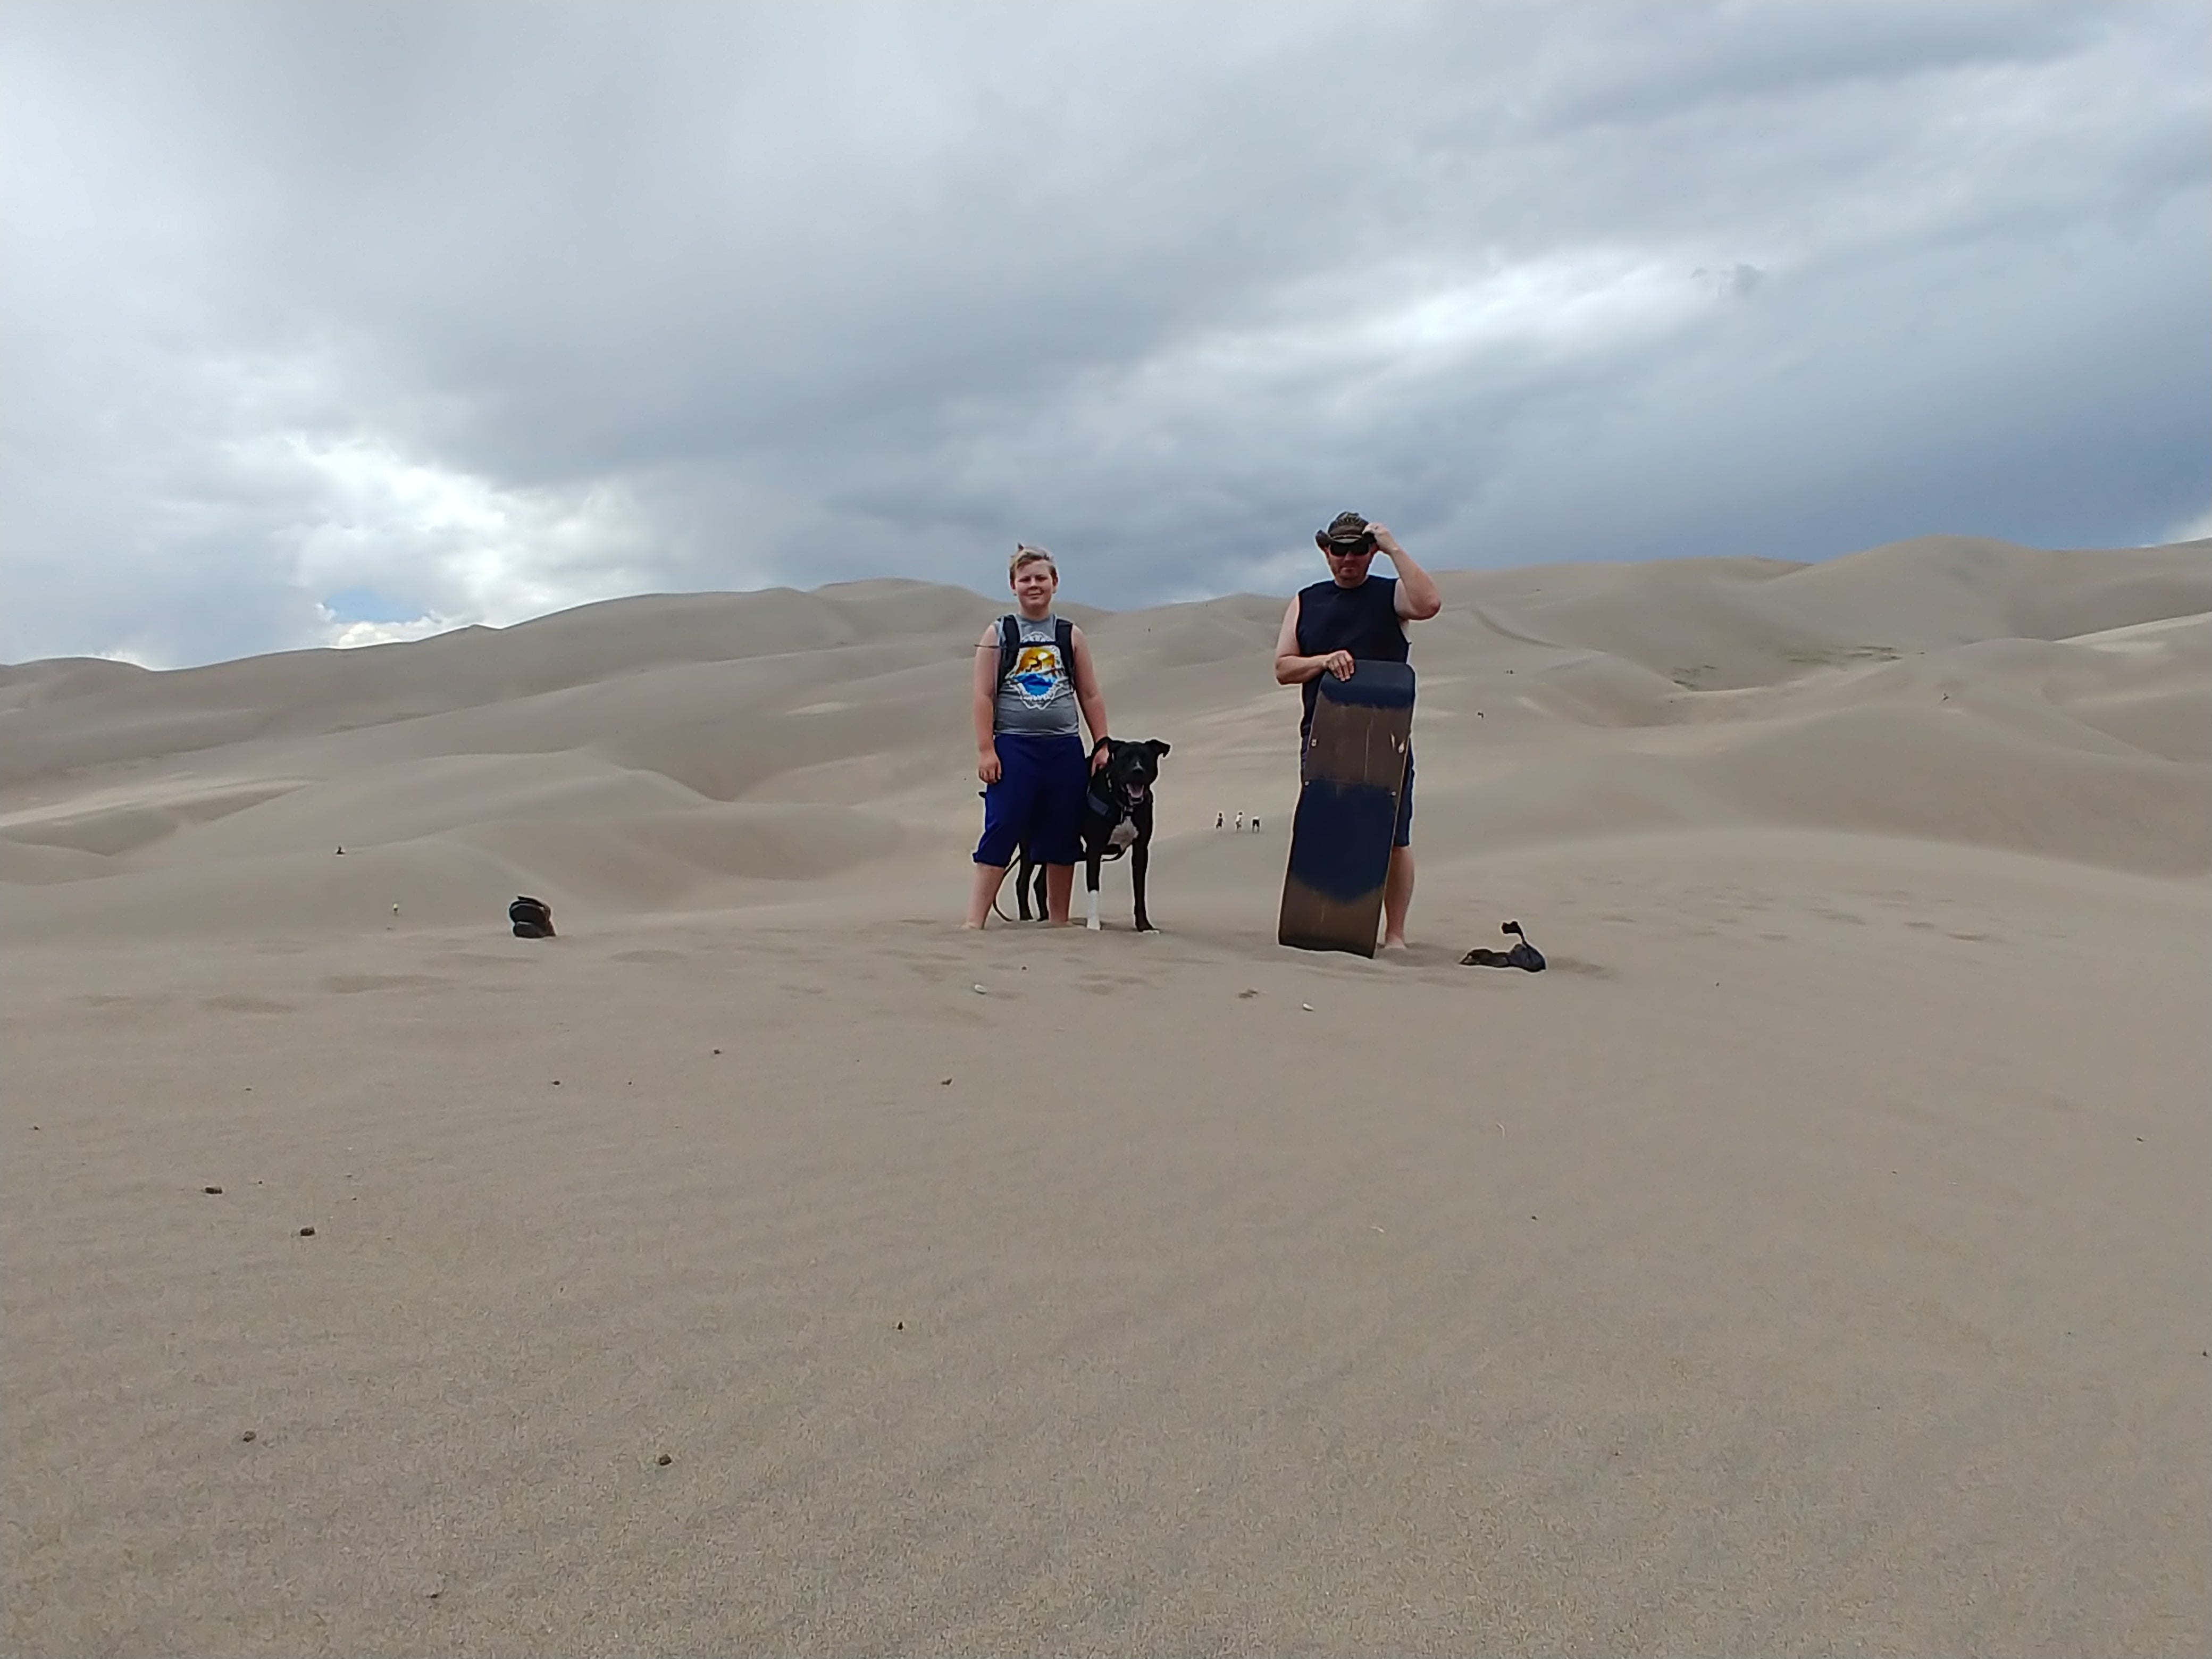 My boys with the rented sand sled at The Dunes.